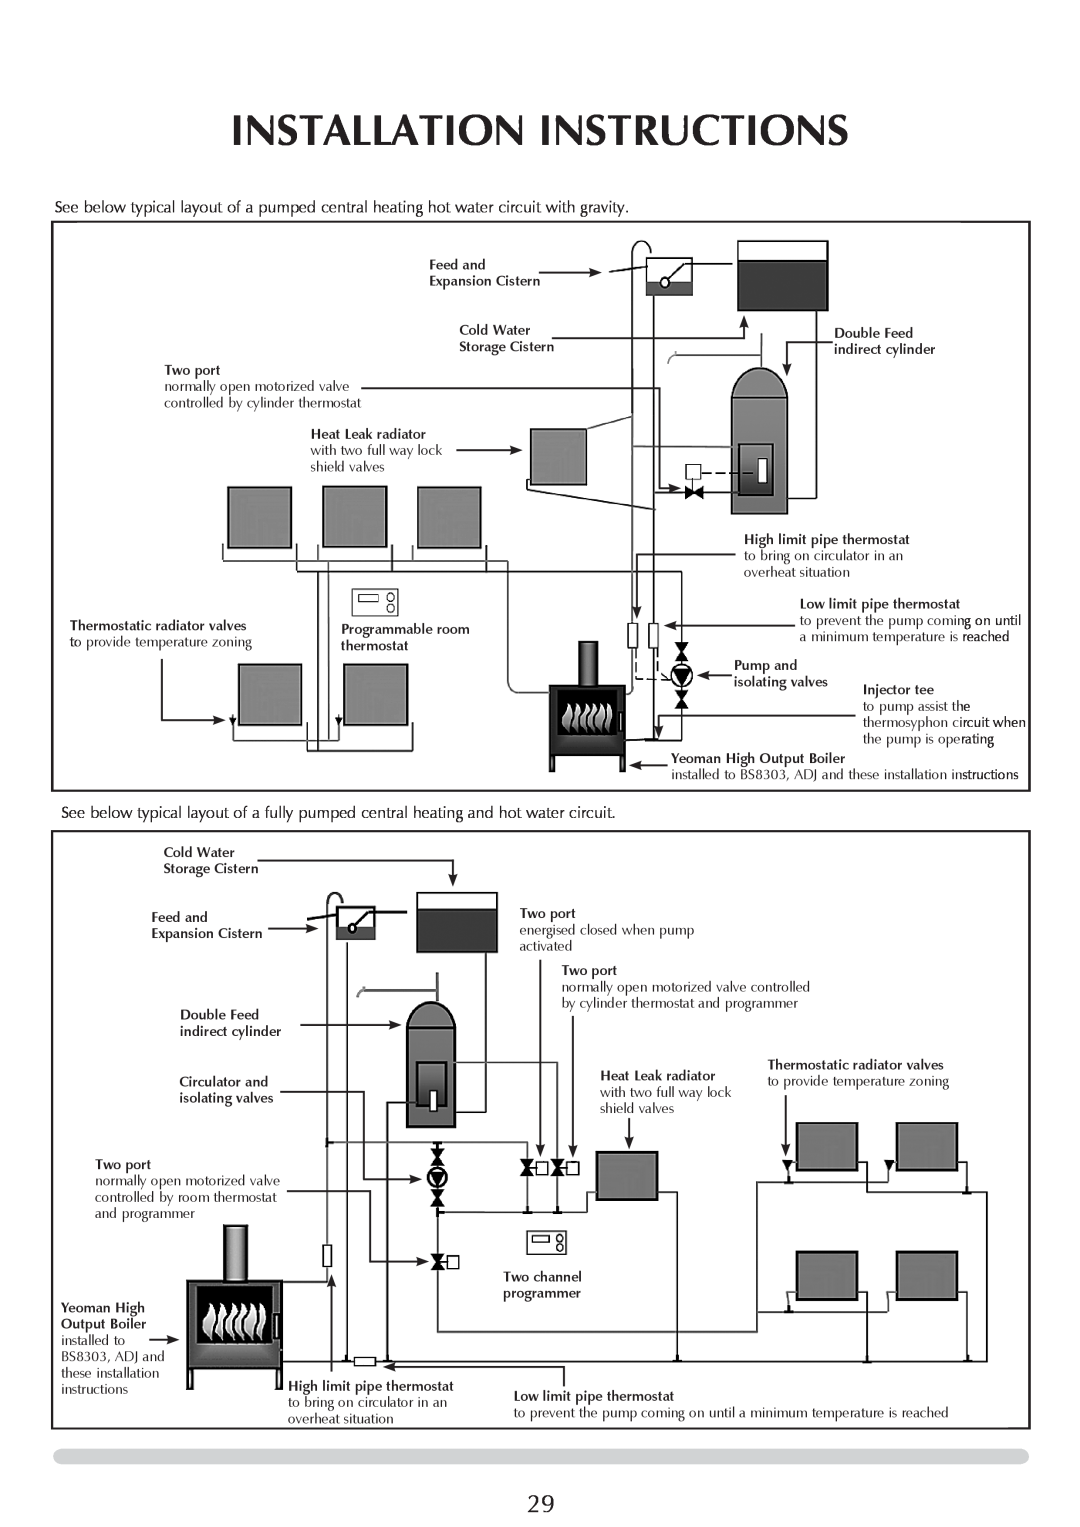 Yeoman YM-CL8HB manual Installation Instructions, Feed and Expansion Cistern 